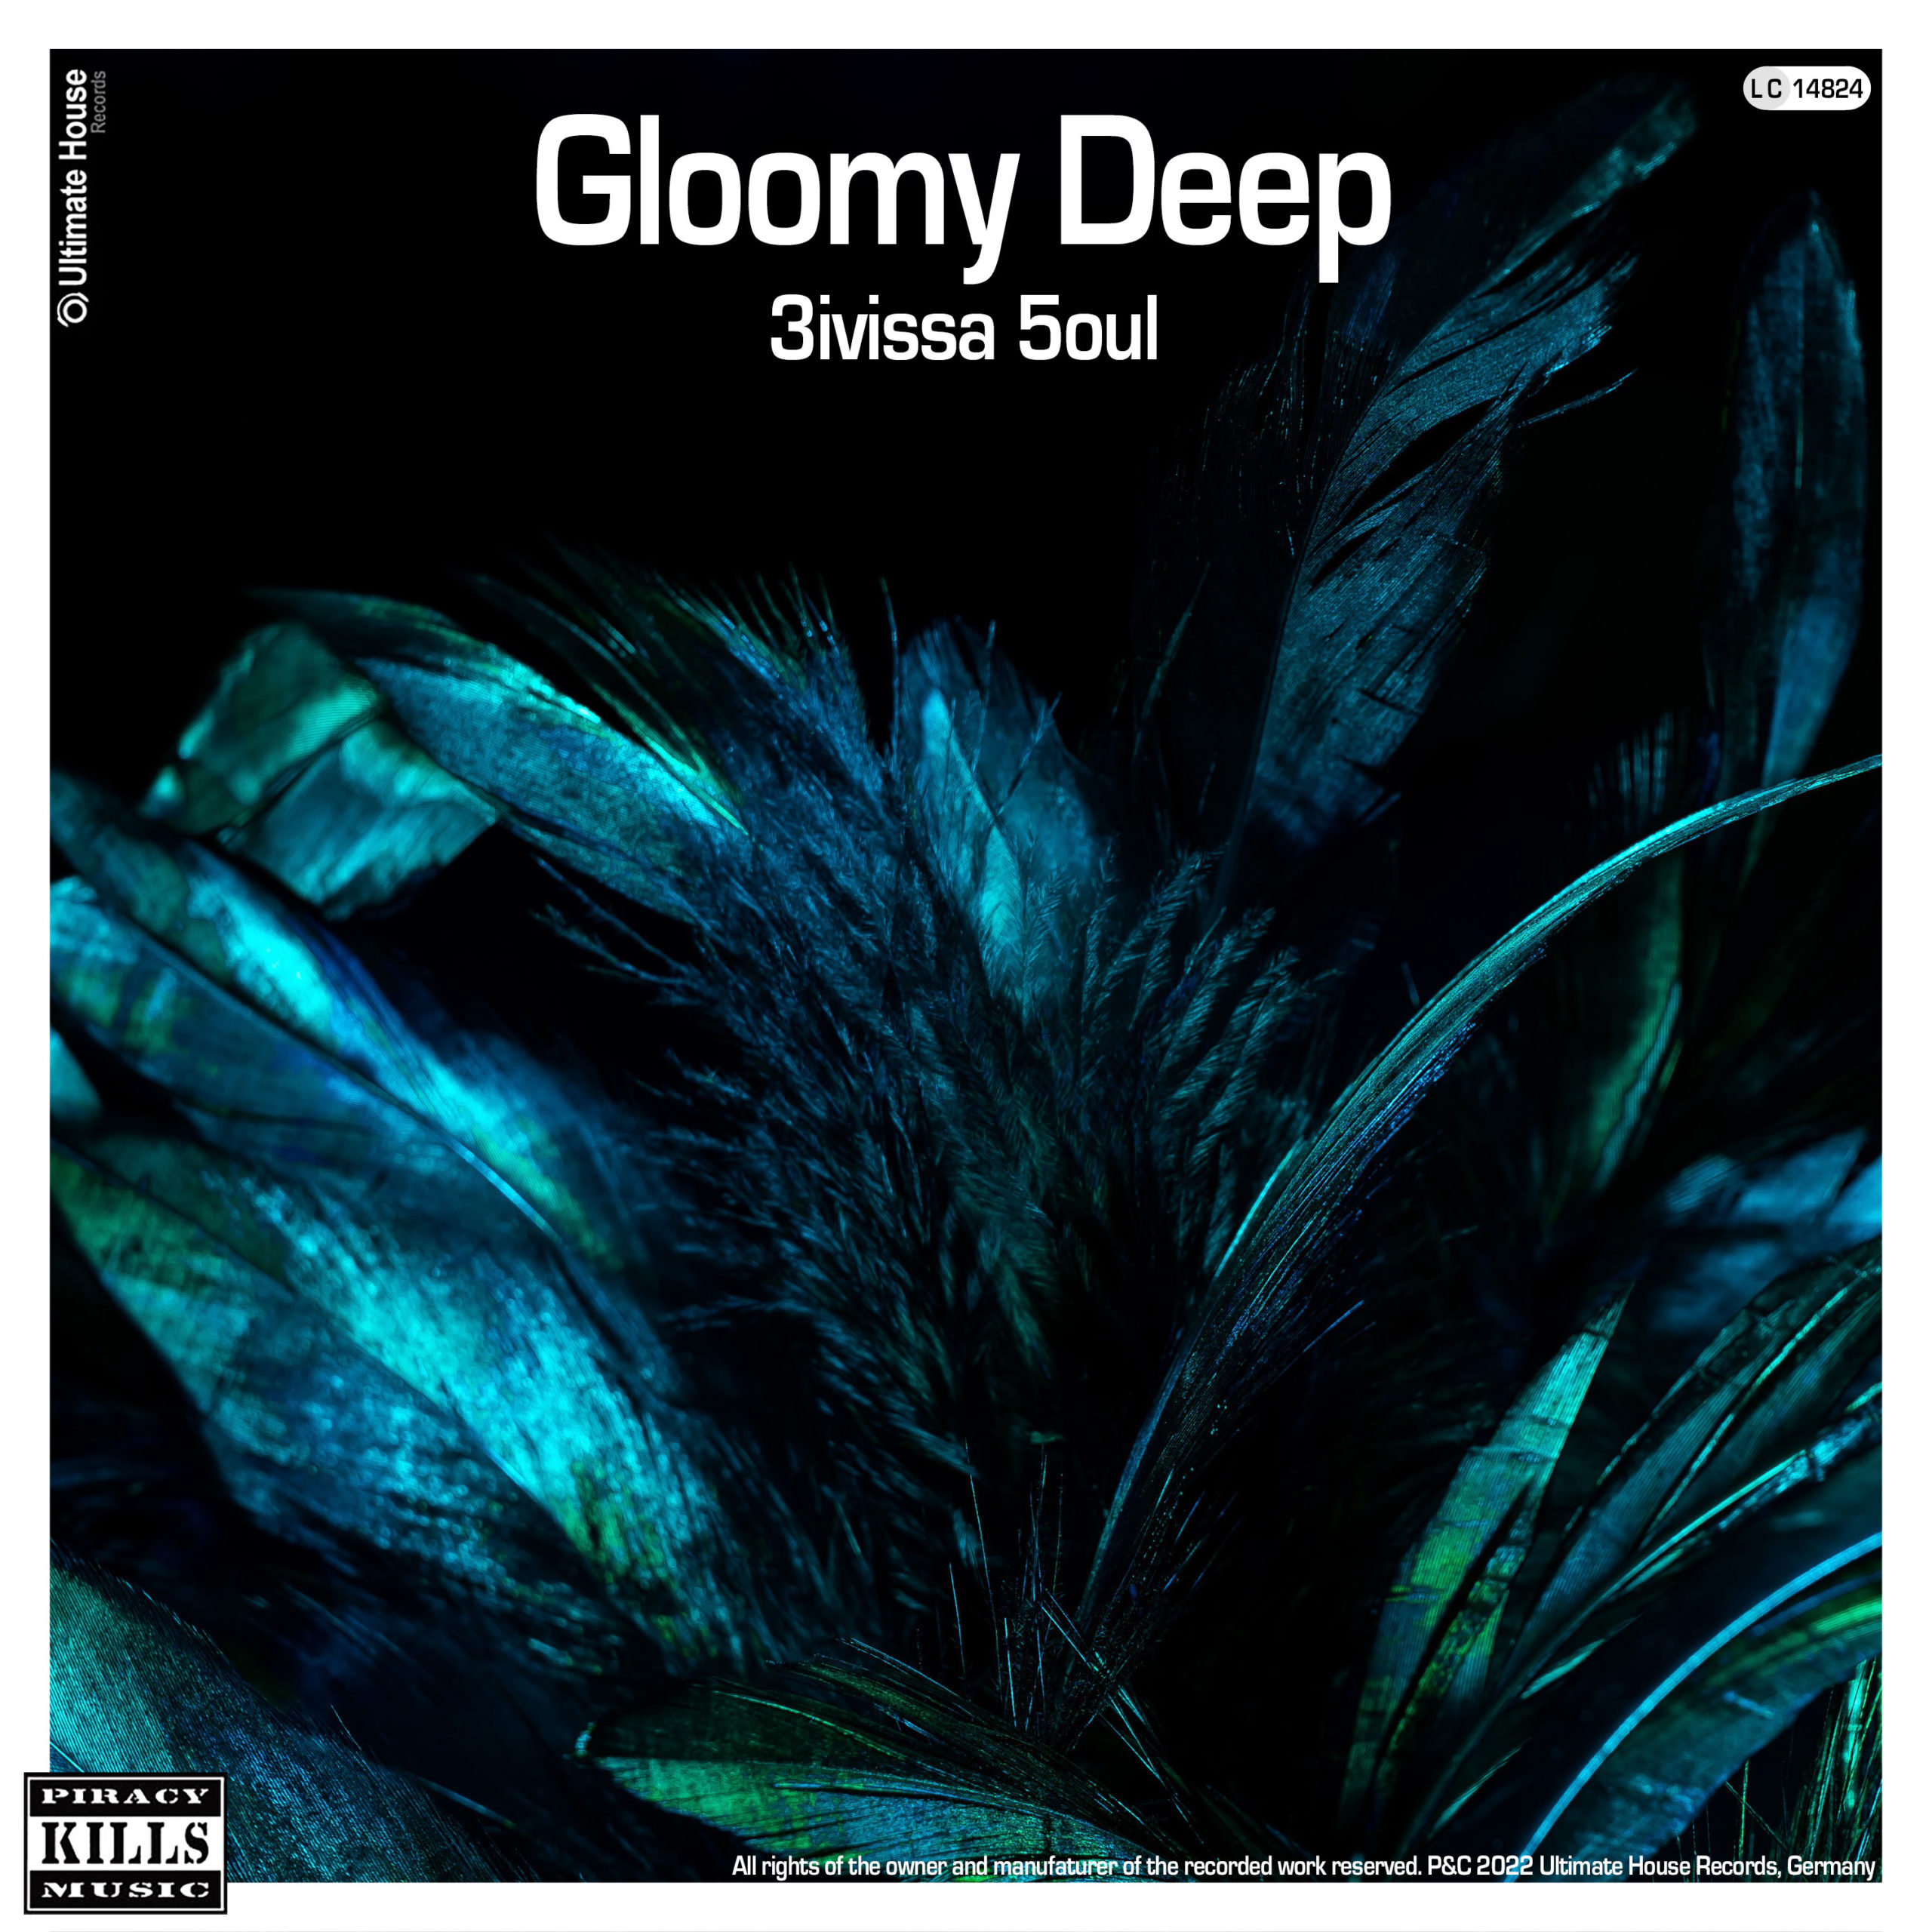 https://www.ultimate-house-records.com/wp-content/uploads/2022/11/166-3ivissa_5oul-Gloomy_Deep-Cover_3000p_web-scaled.jpg